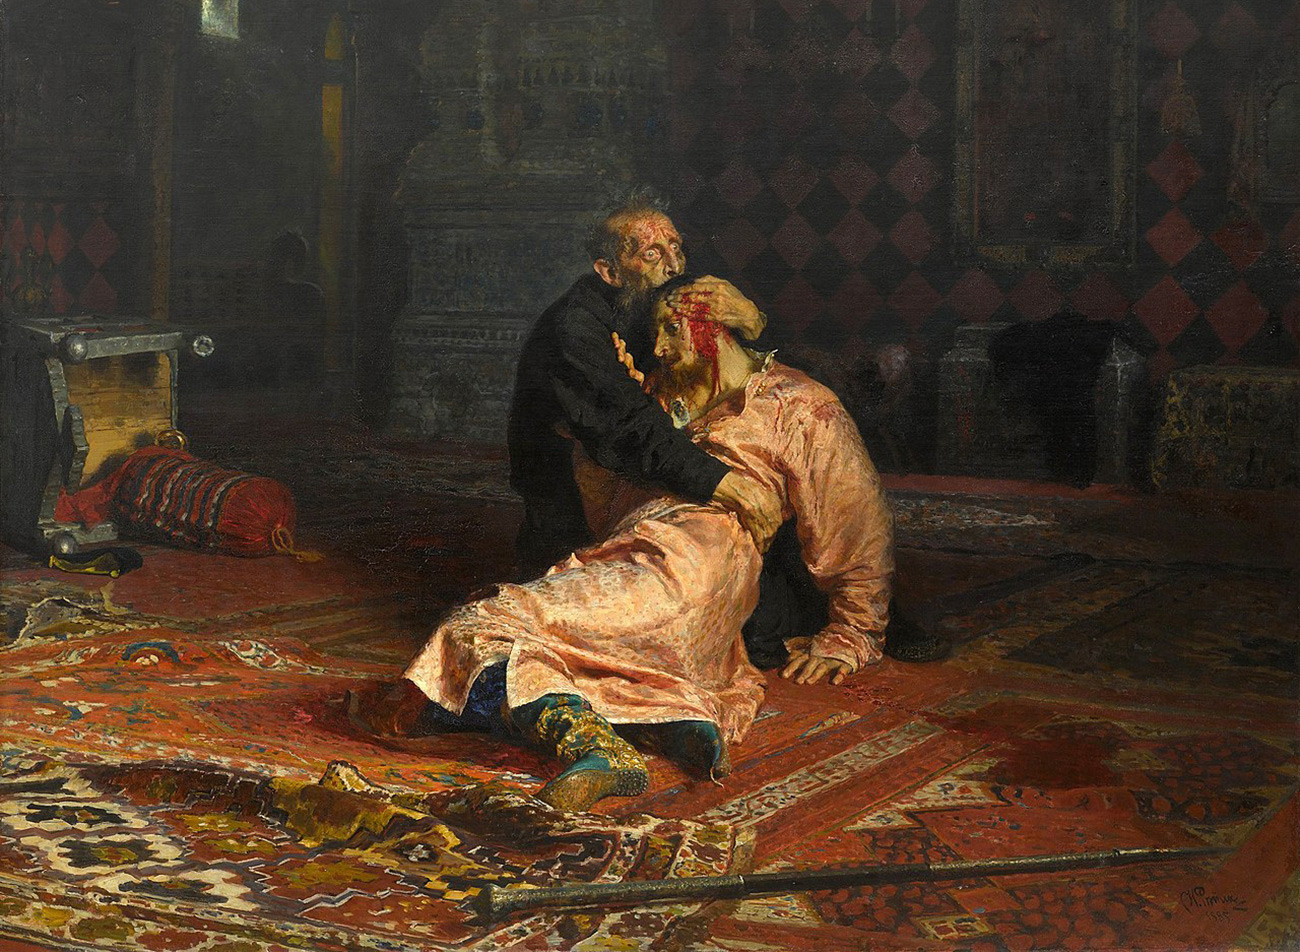 'Ivan the Terrible and His Son Ivan' (1883–1885) by Ilya Repin (1844 – 1930)